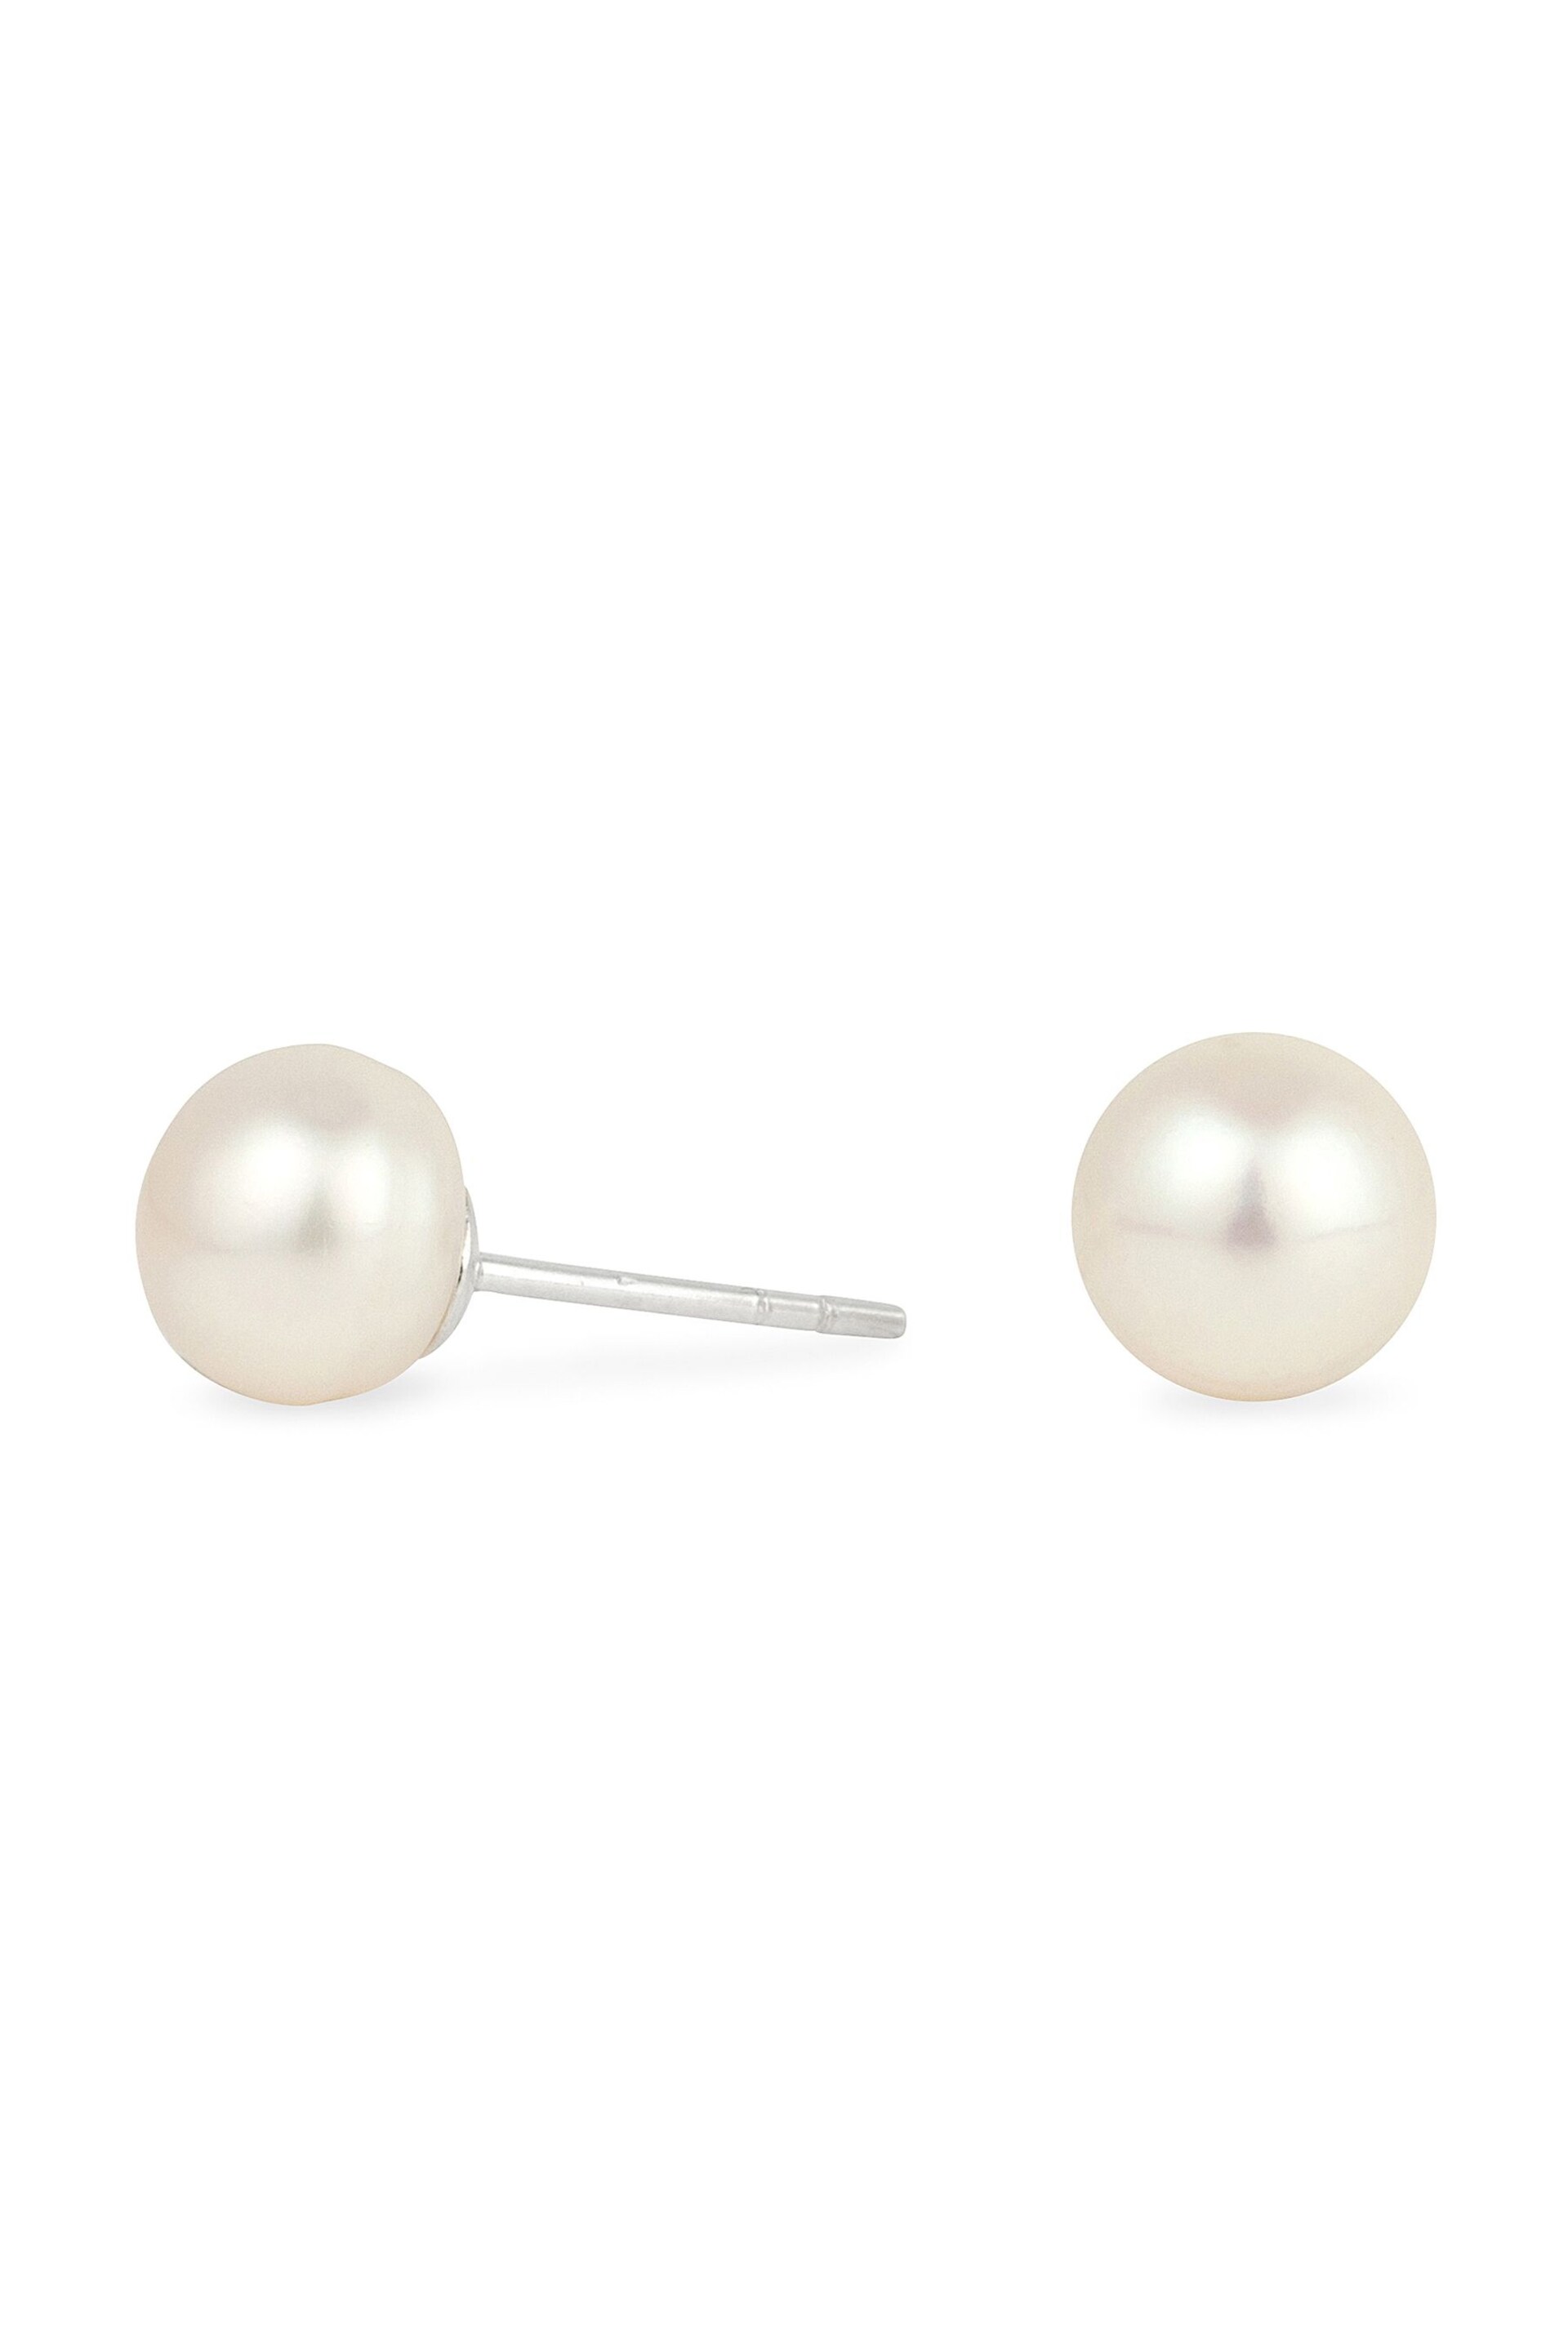 Simply Silver Silver Tone 8mm Fresh Water Pearl Studs Earrings - Image 1 of 1